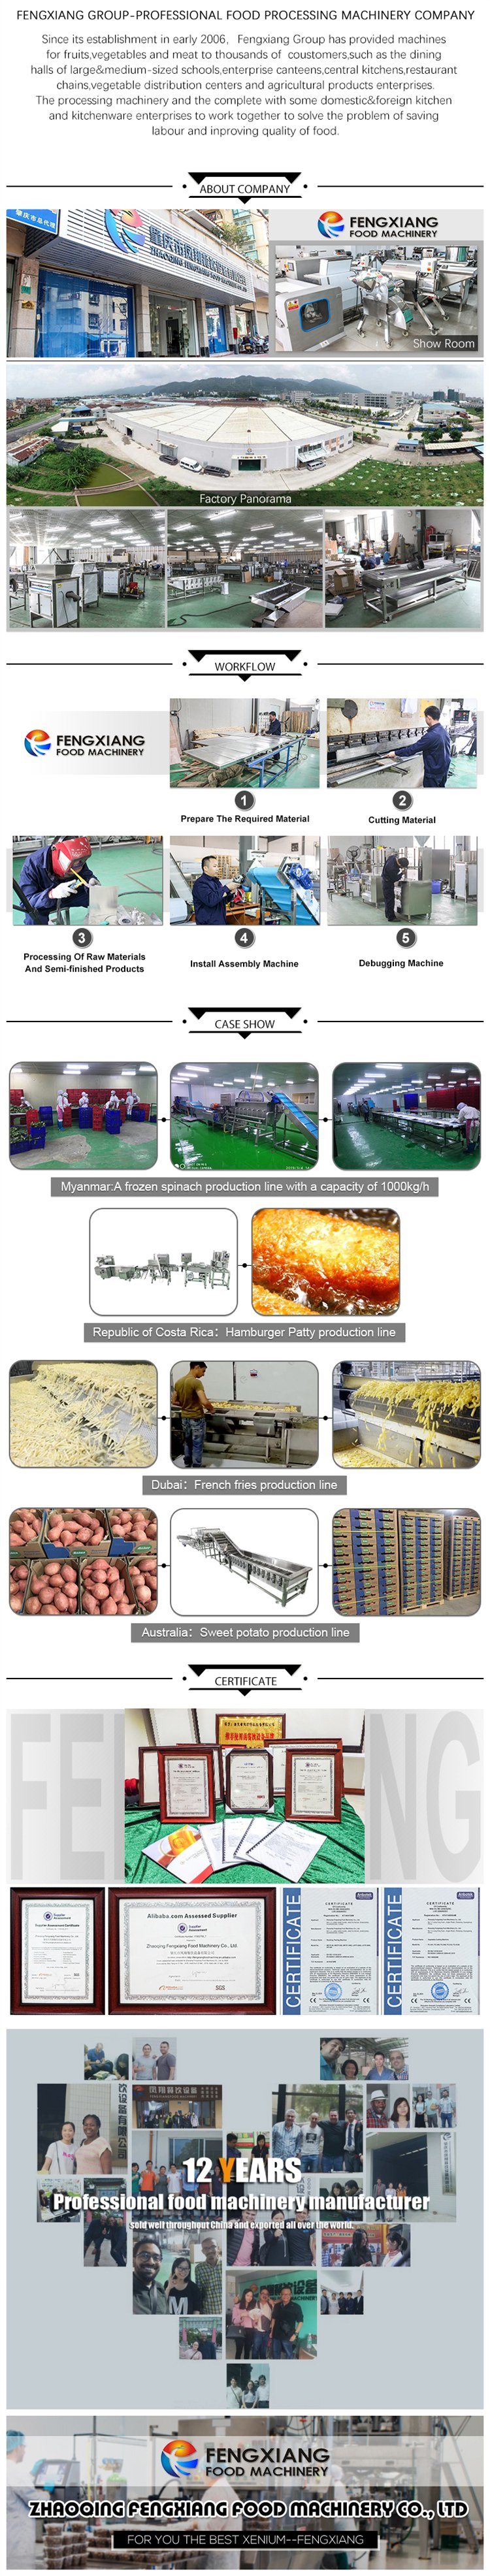 Commercial Cutter Type Frozen Meat Dicing Dicer Machine with Stainless Steel, Frozen Meat Cube Cutter